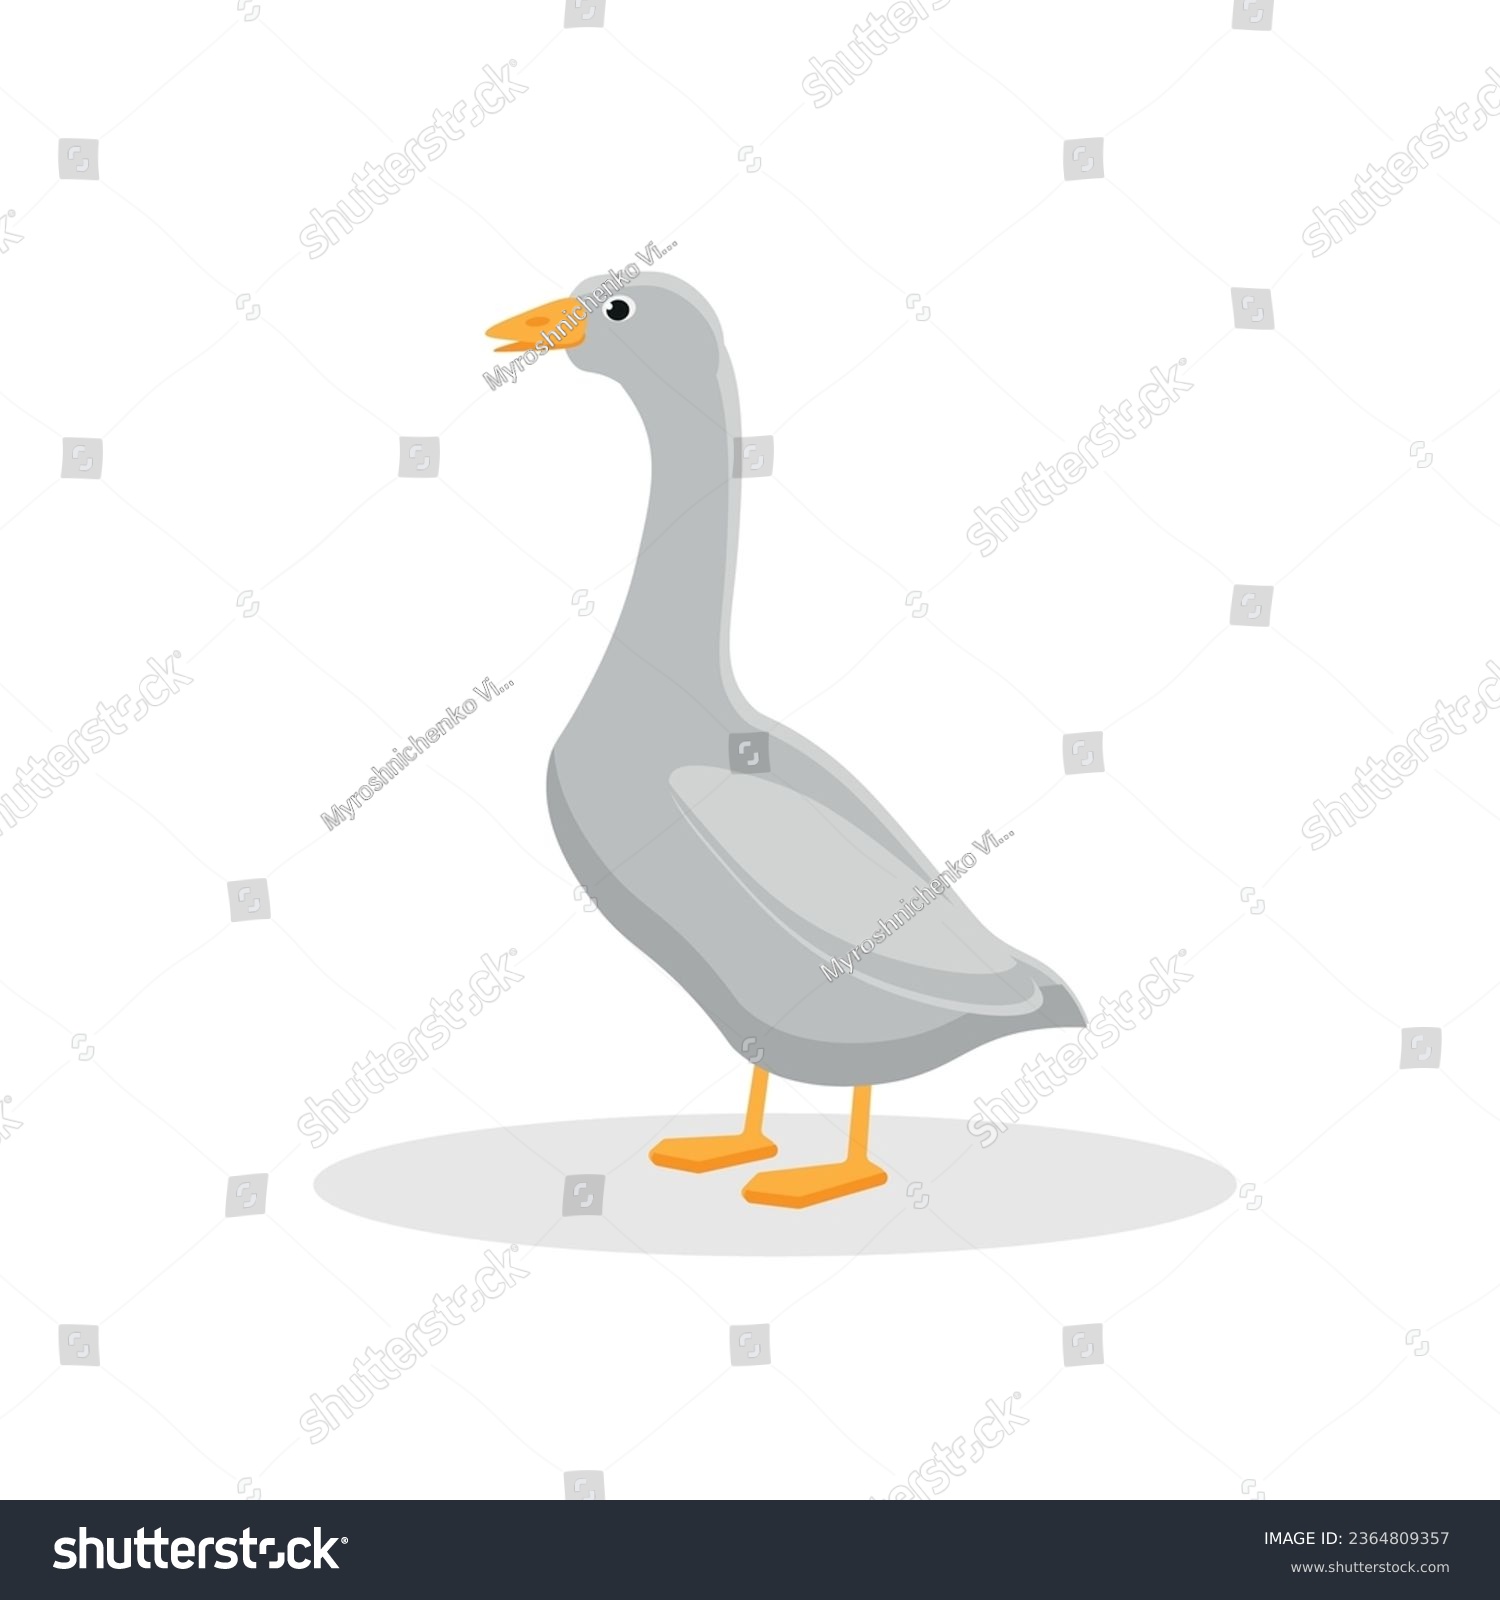 SVG of Vector goose. Flat illustration. Suitable for animation, using in web, apps, books, education projects. No transparency, solid colors only. Svg, lottie without bags. svg